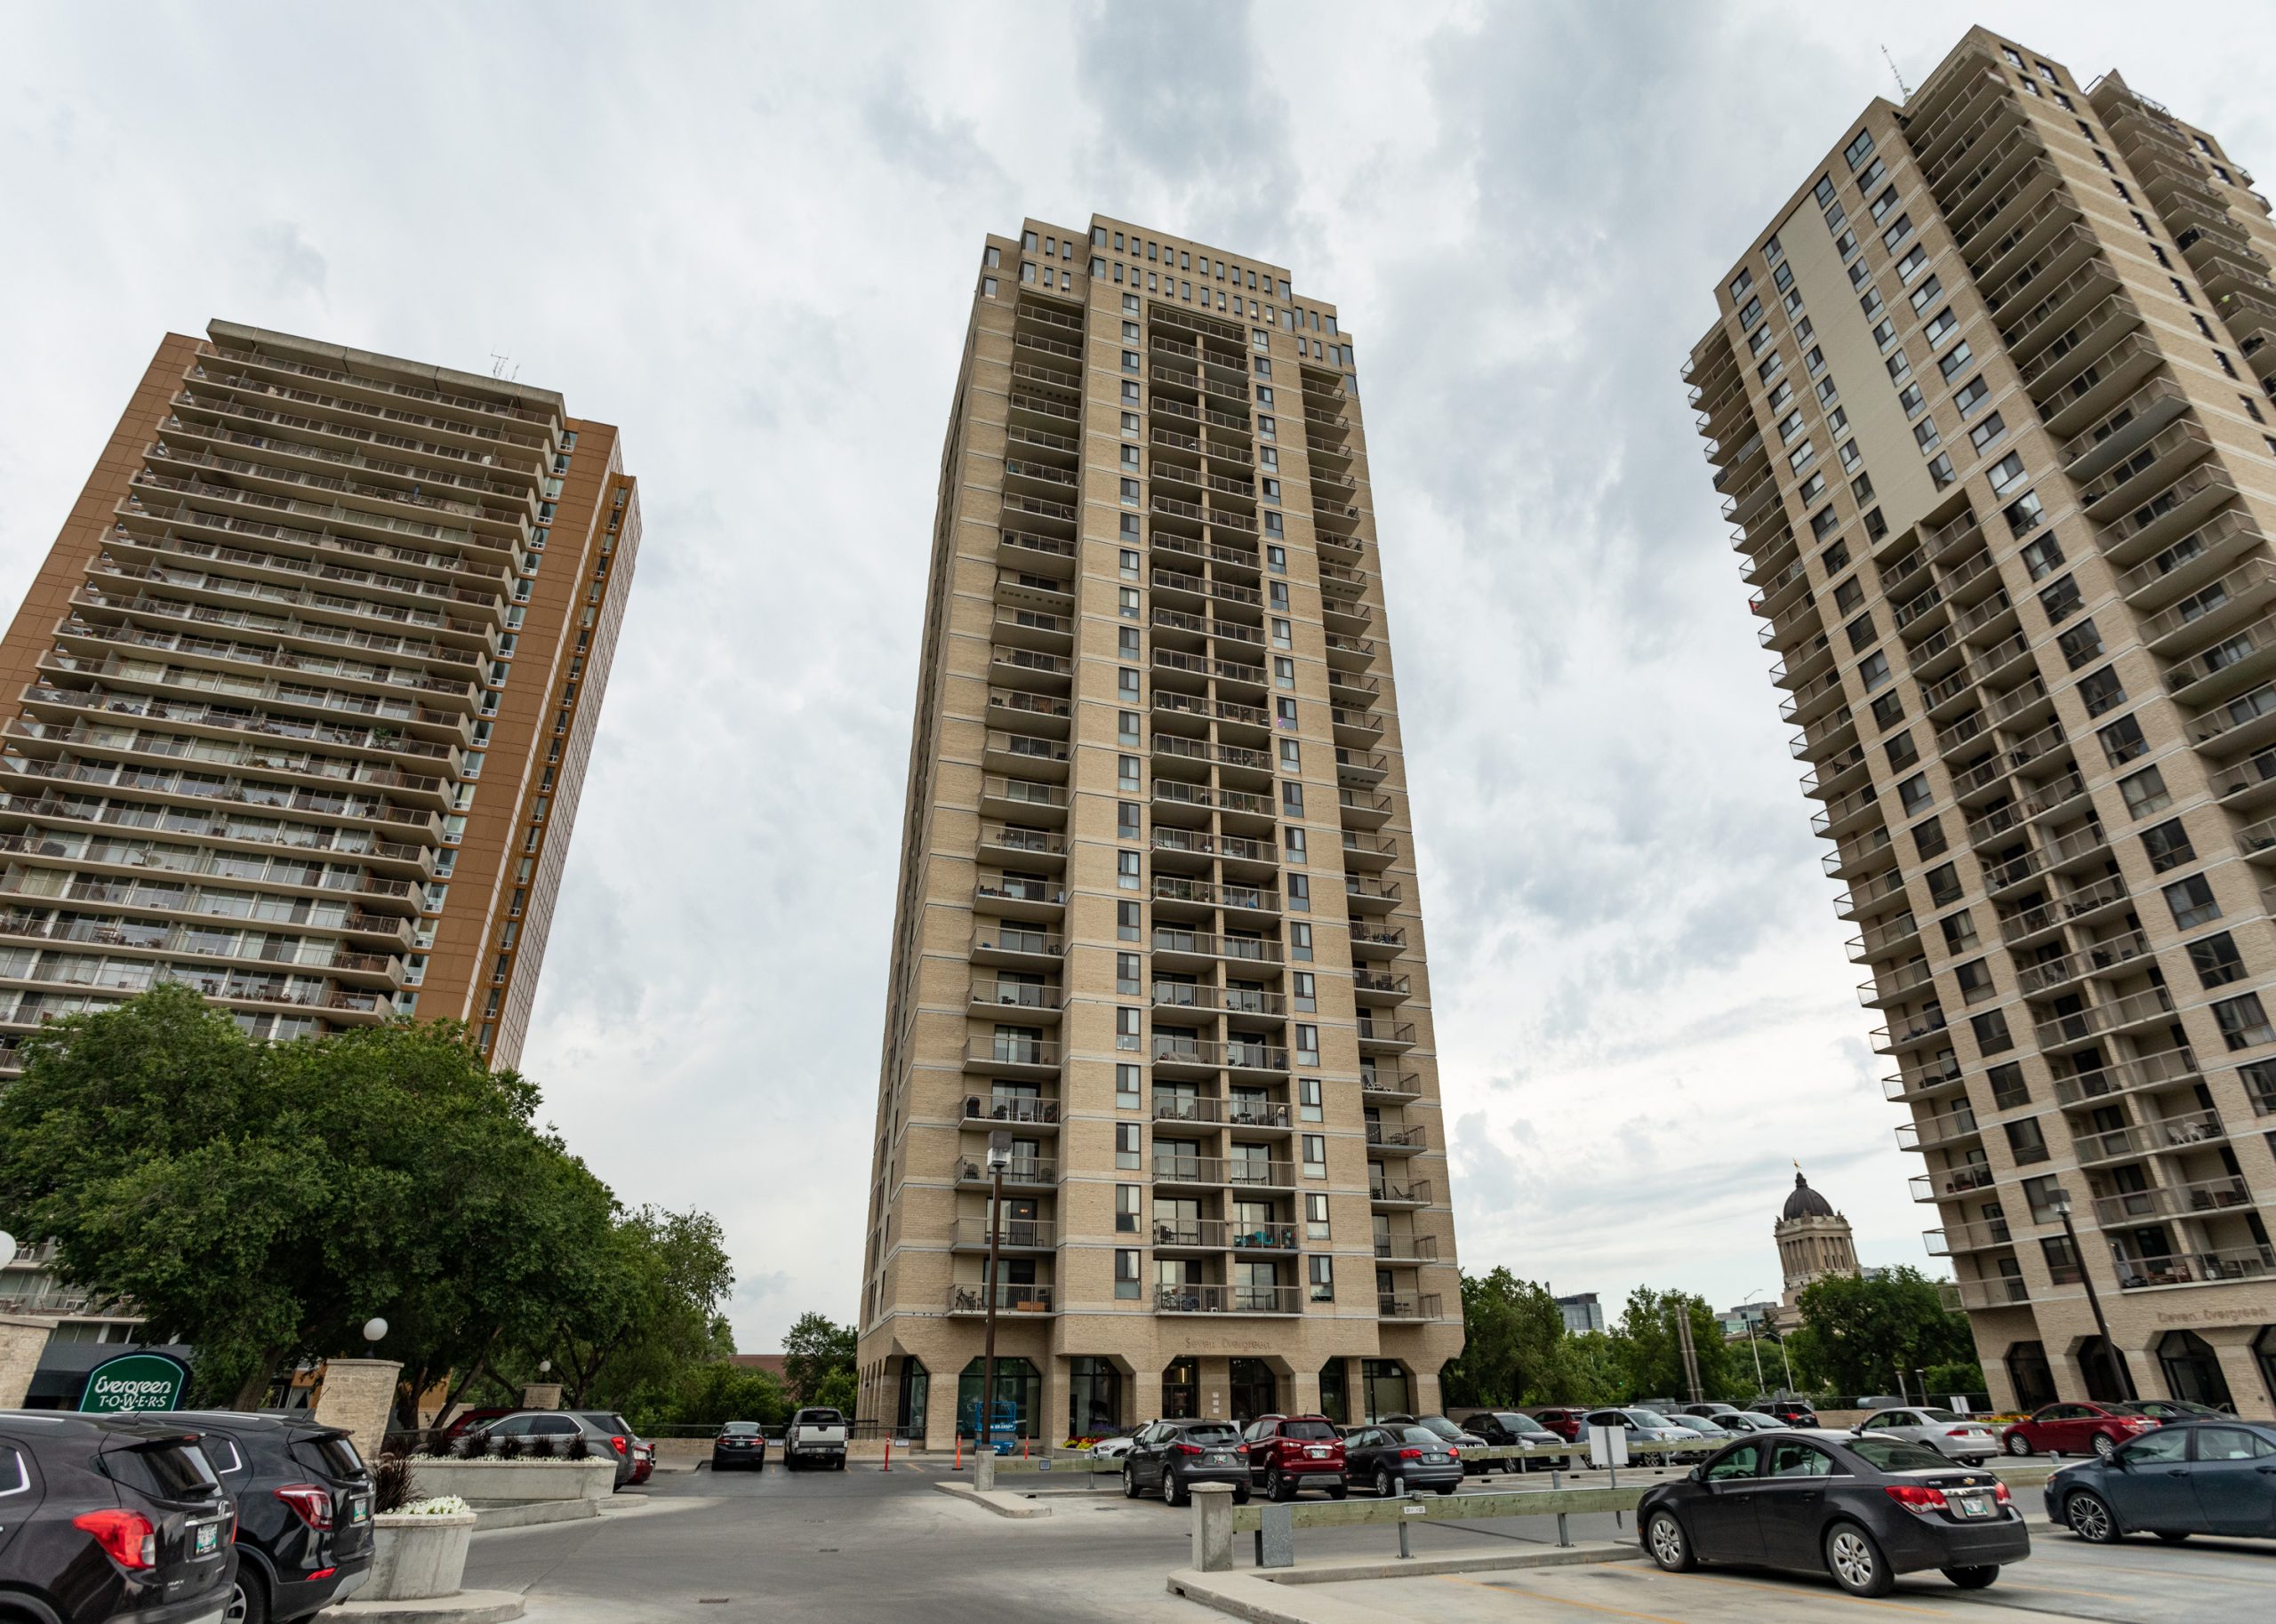 Image of Evergreen Towers at 7 and 11 Evergreen Place